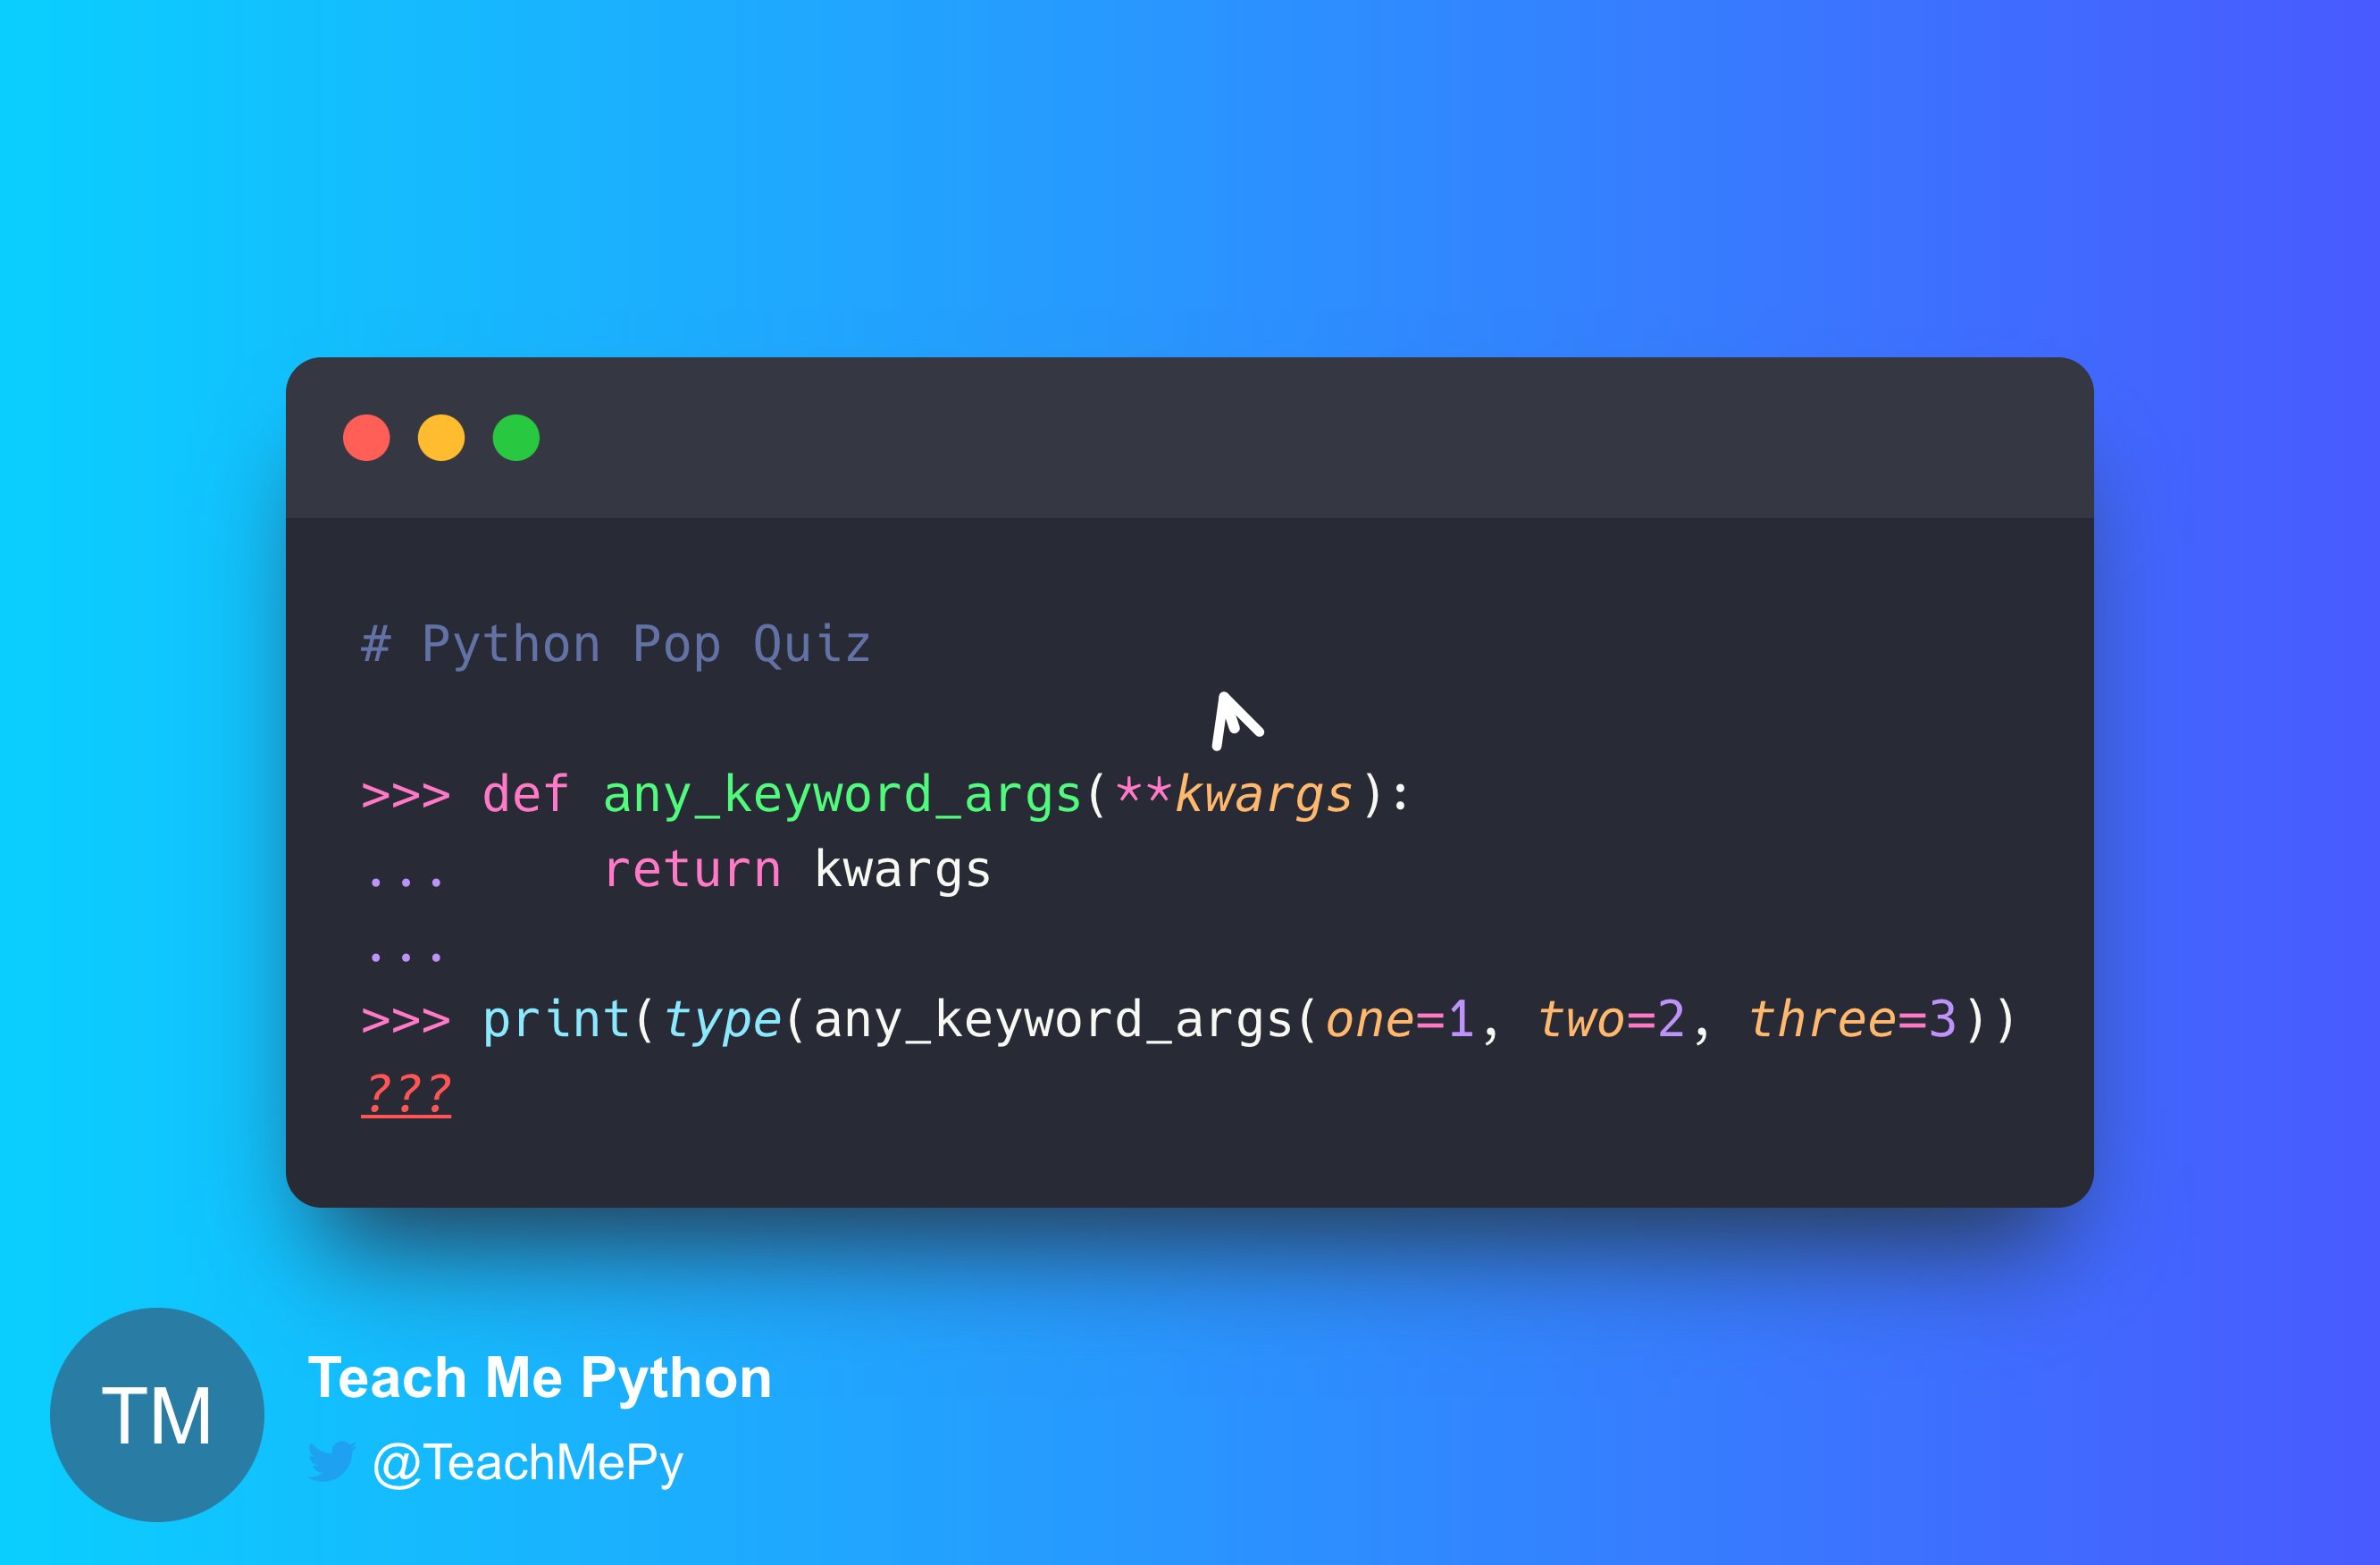 commentaar verkoudheid Willen Mike Driscoll on Twitter: "#Python Pop Quiz 🐍❓ What is the data type  that's returned from this function? A) tuple B) list C) dict D) set  https://t.co/t5VVws0sqx" / Twitter